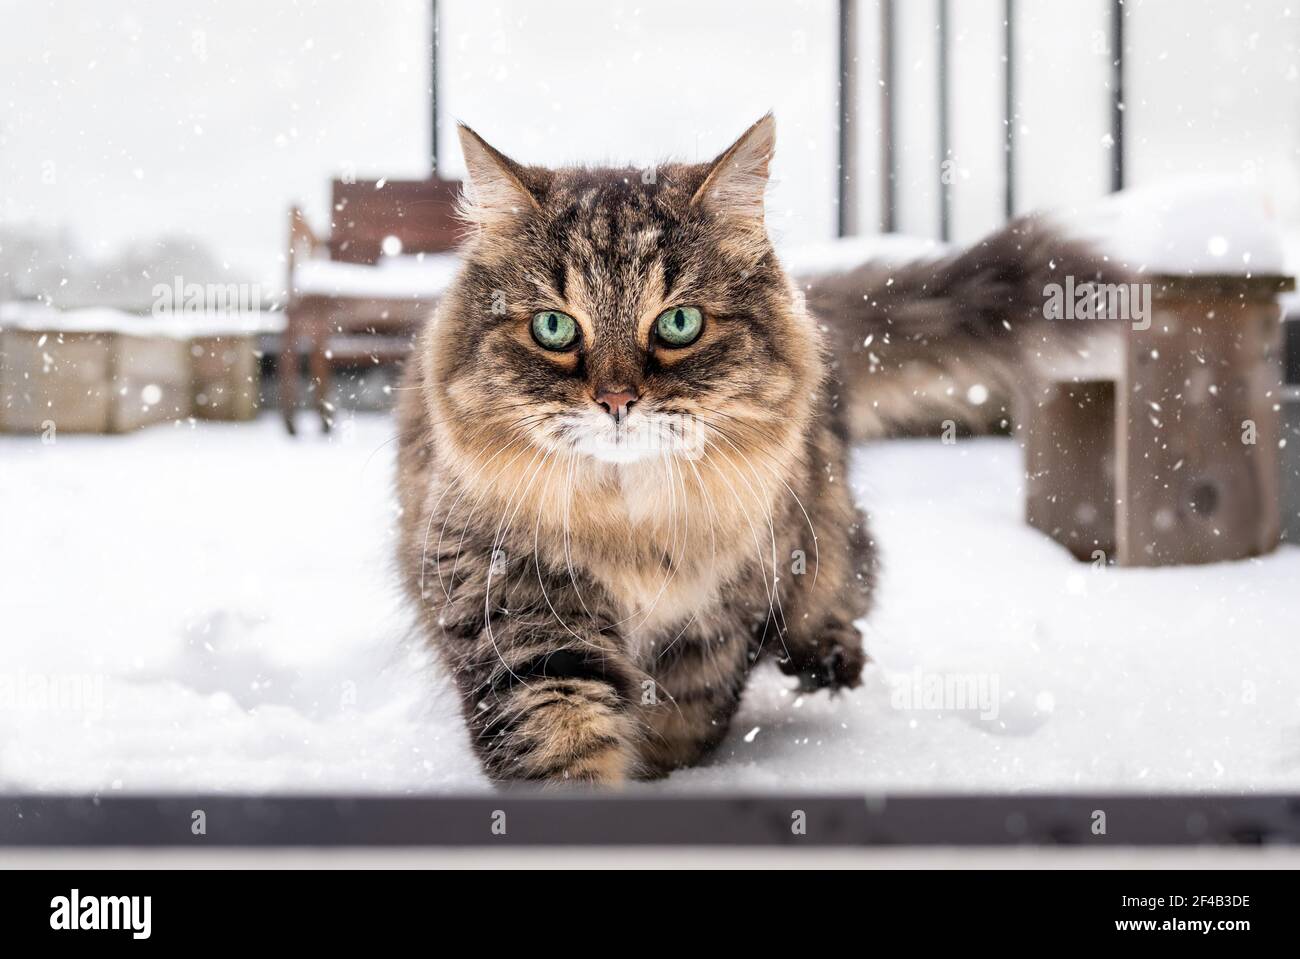 Beautiful cat walking in snow. Female senior tabby cat returning to warm up after adventuring out on patio while snowing. Stunning markings with green Stock Photo